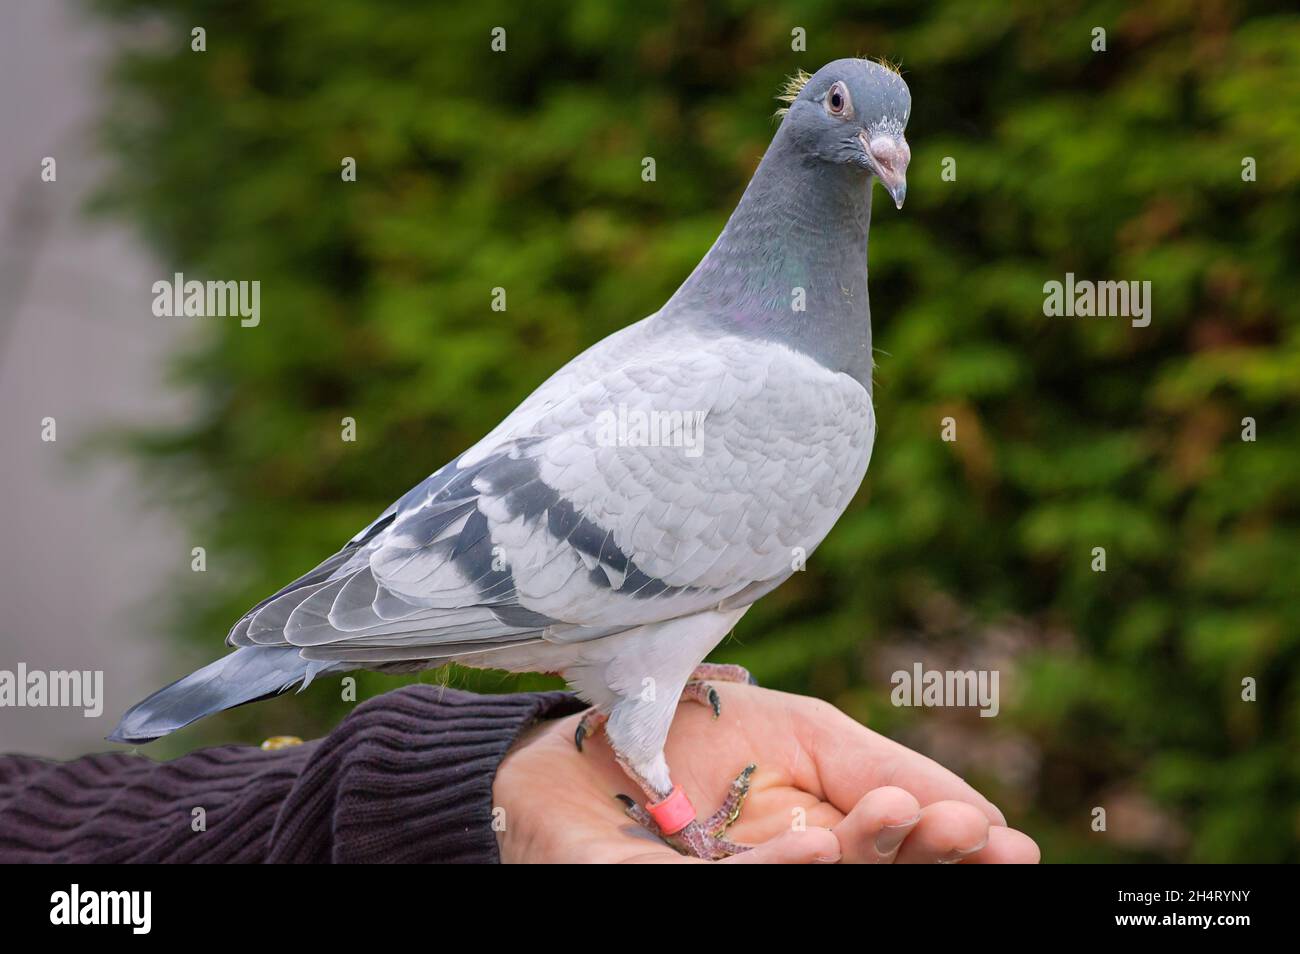 Young racing pigeon on a fancier's hand looks straight into the camera Stock Photo